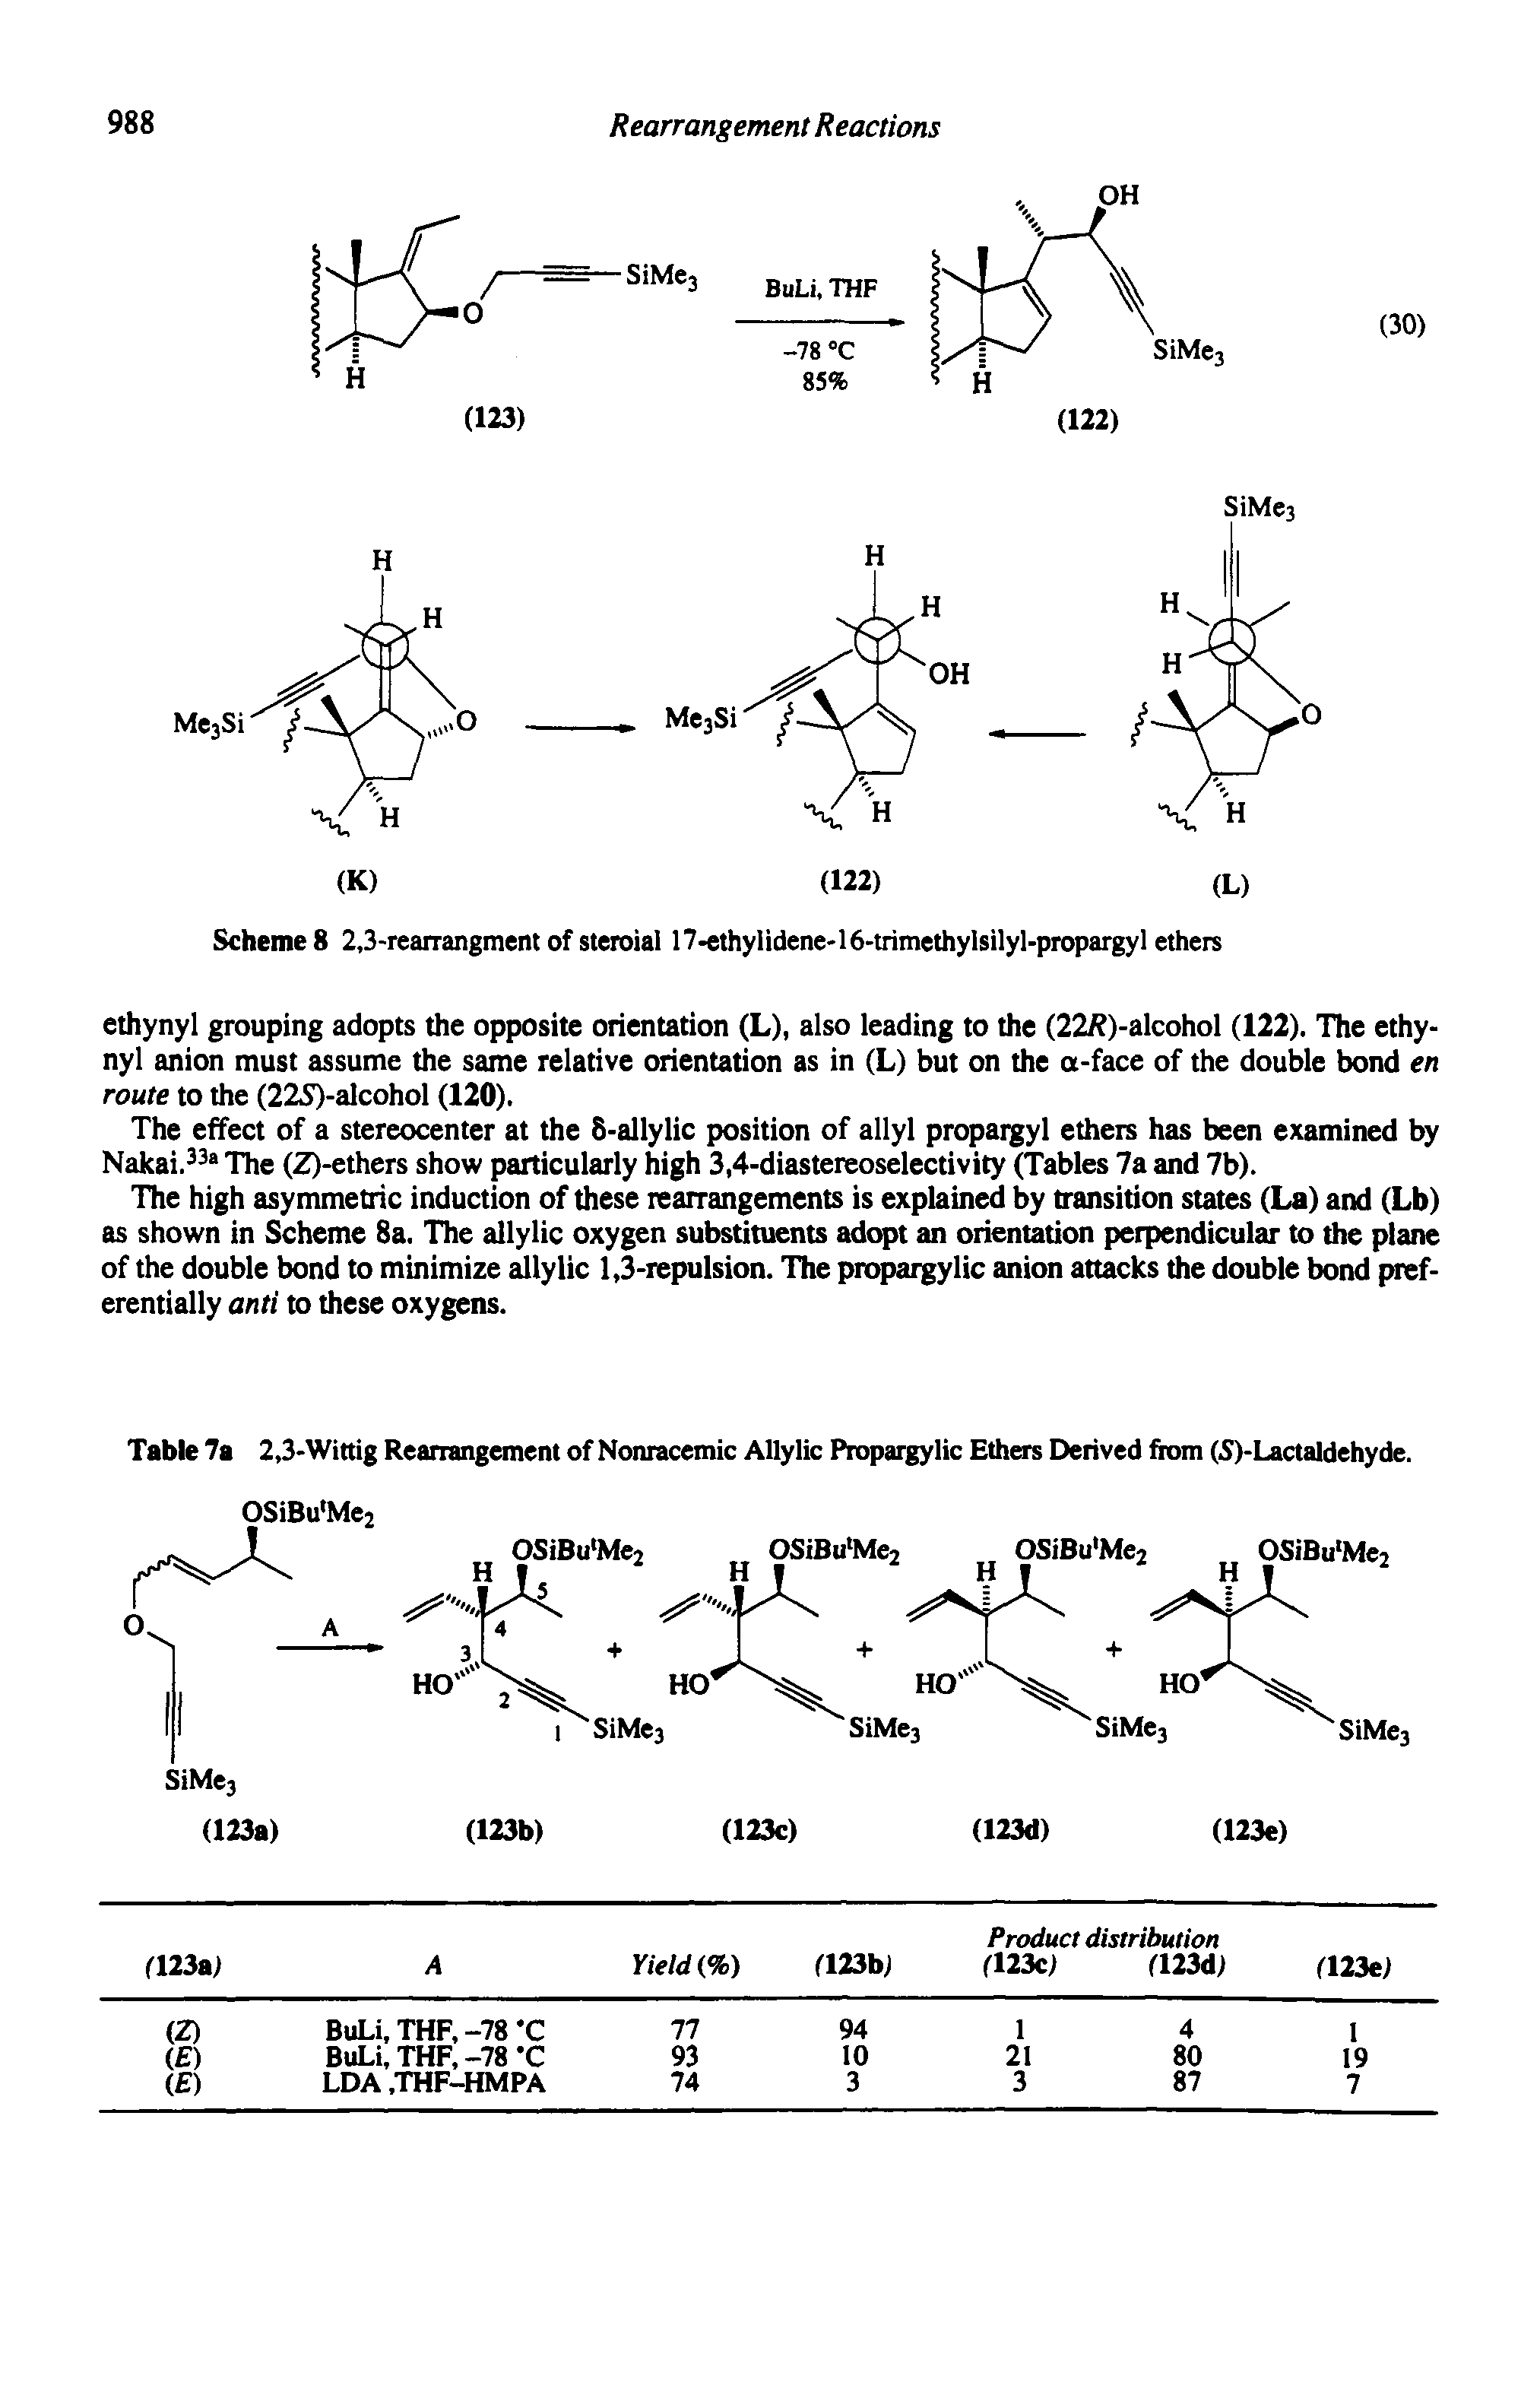 Table 7a 2,3-Wittig Rearrangement of Nonracemic Allylic Propargylic Ethers Derived fiom (5)-Lactaldehyde. OSiBu Me2...